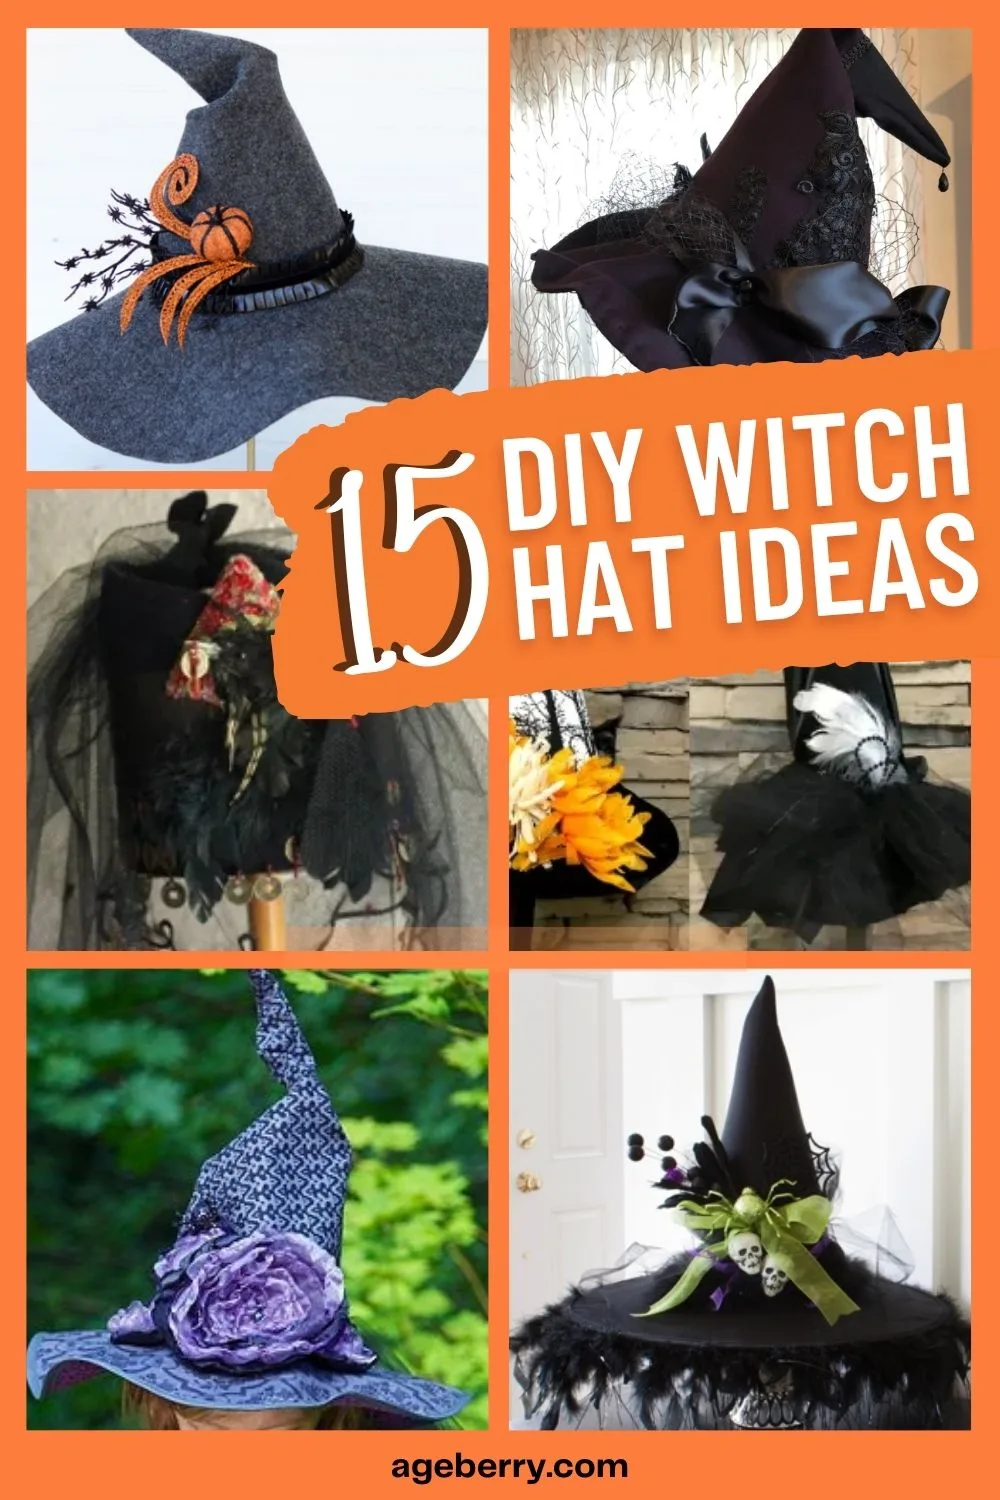 15 DIY Witch Hat Ideas to Try This Halloween